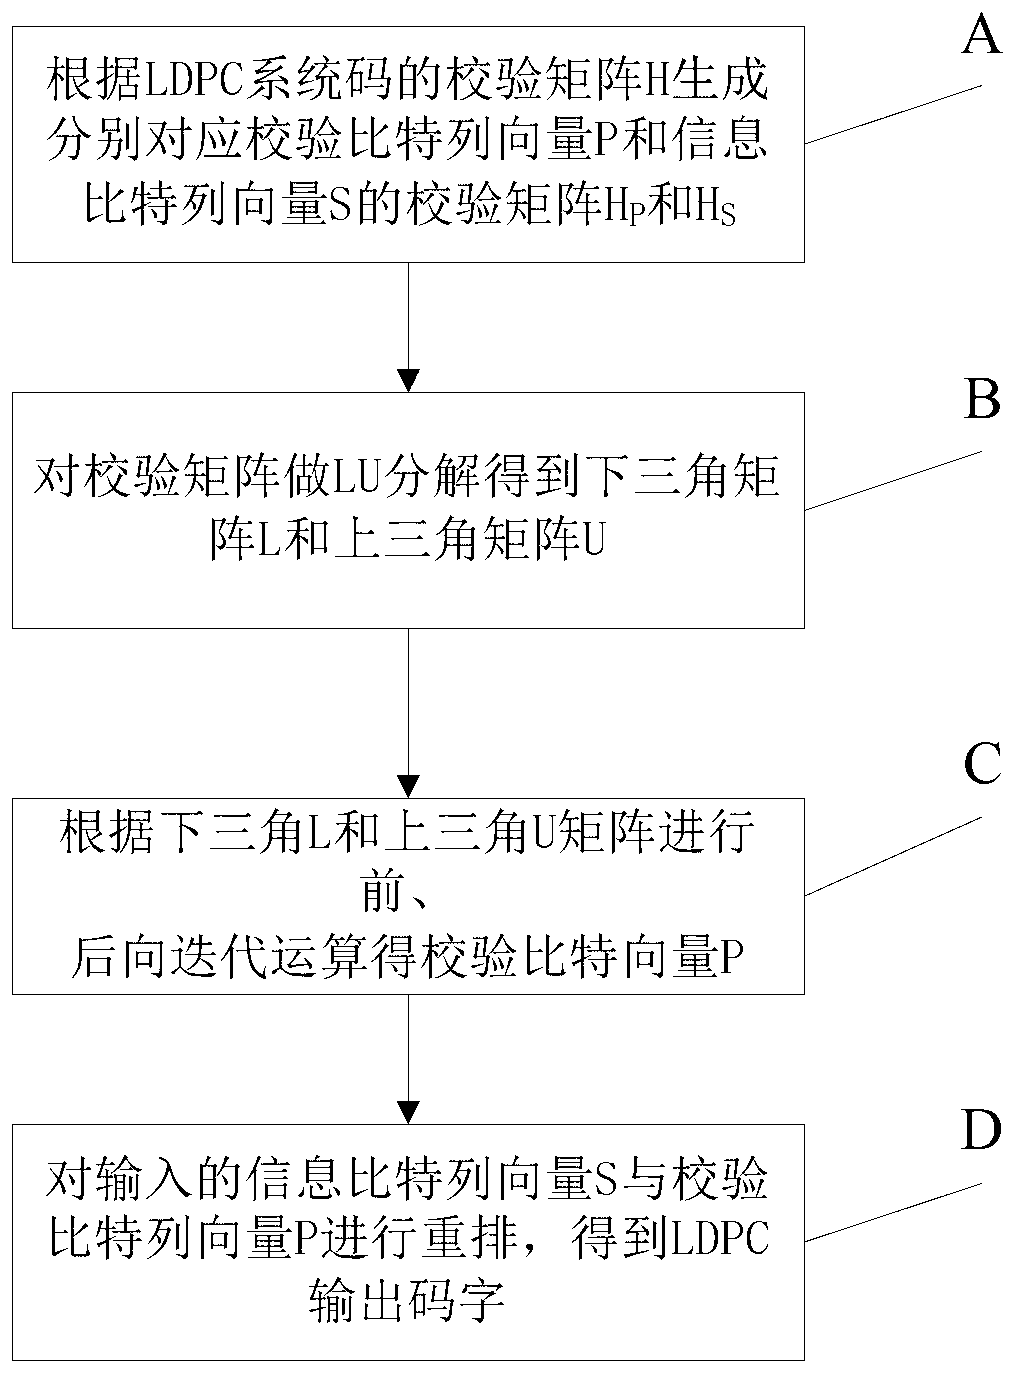 LDPC (Low Density Parity Check) encoding method based on FPGA (Field Programmable Gate Array) and used in CMMB (China Mobile Multimedia Broadcasting) exciter